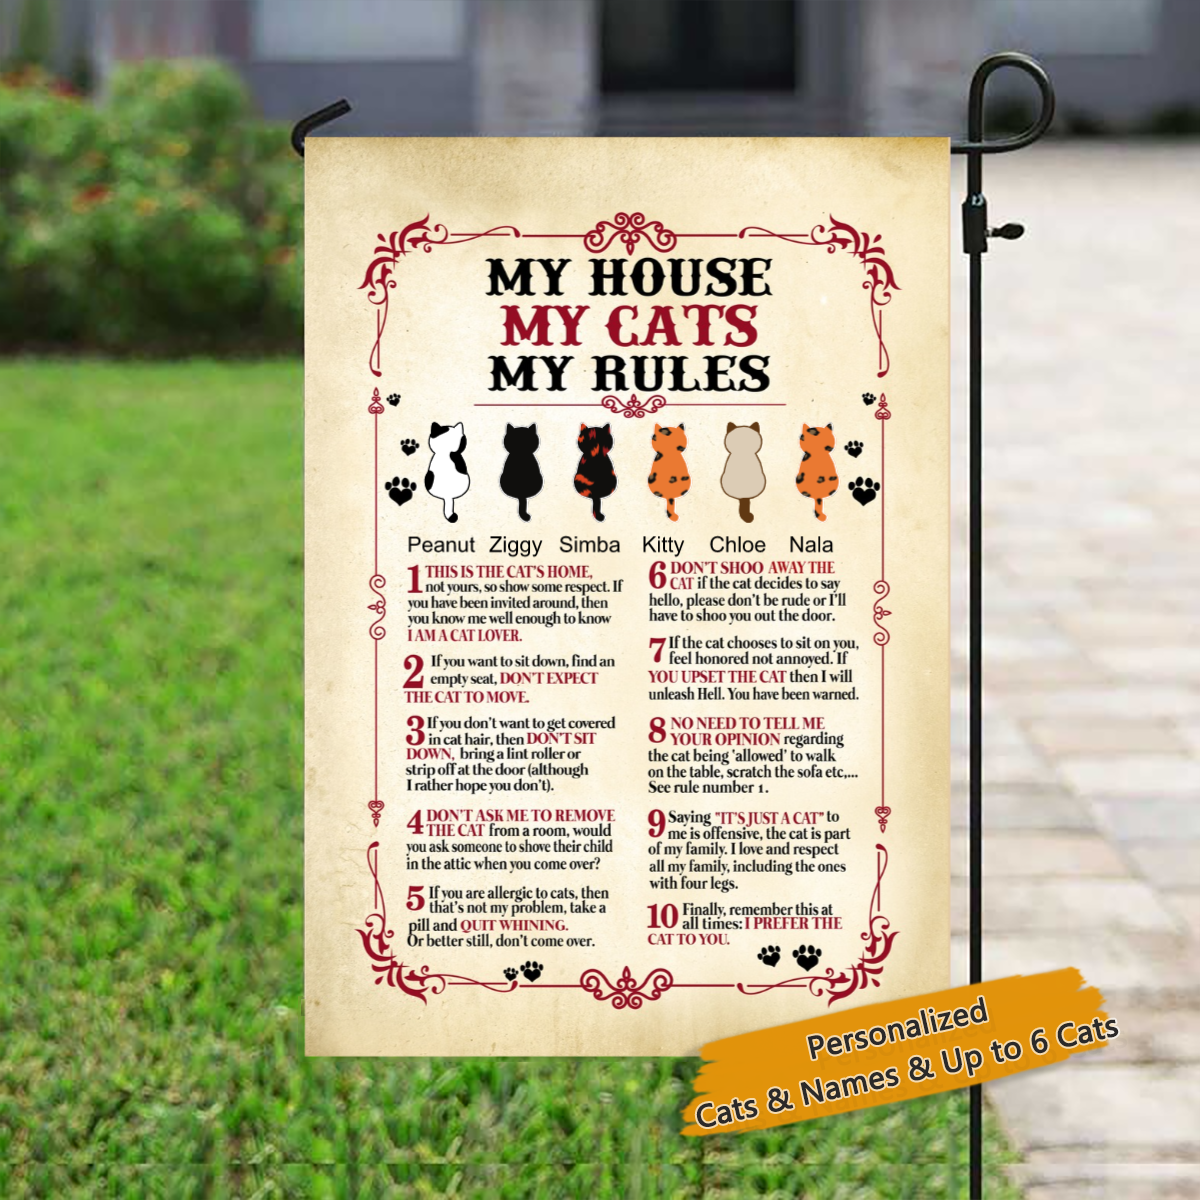 My House My Cats My Rules Personalized Cat Decorative Garden Flags